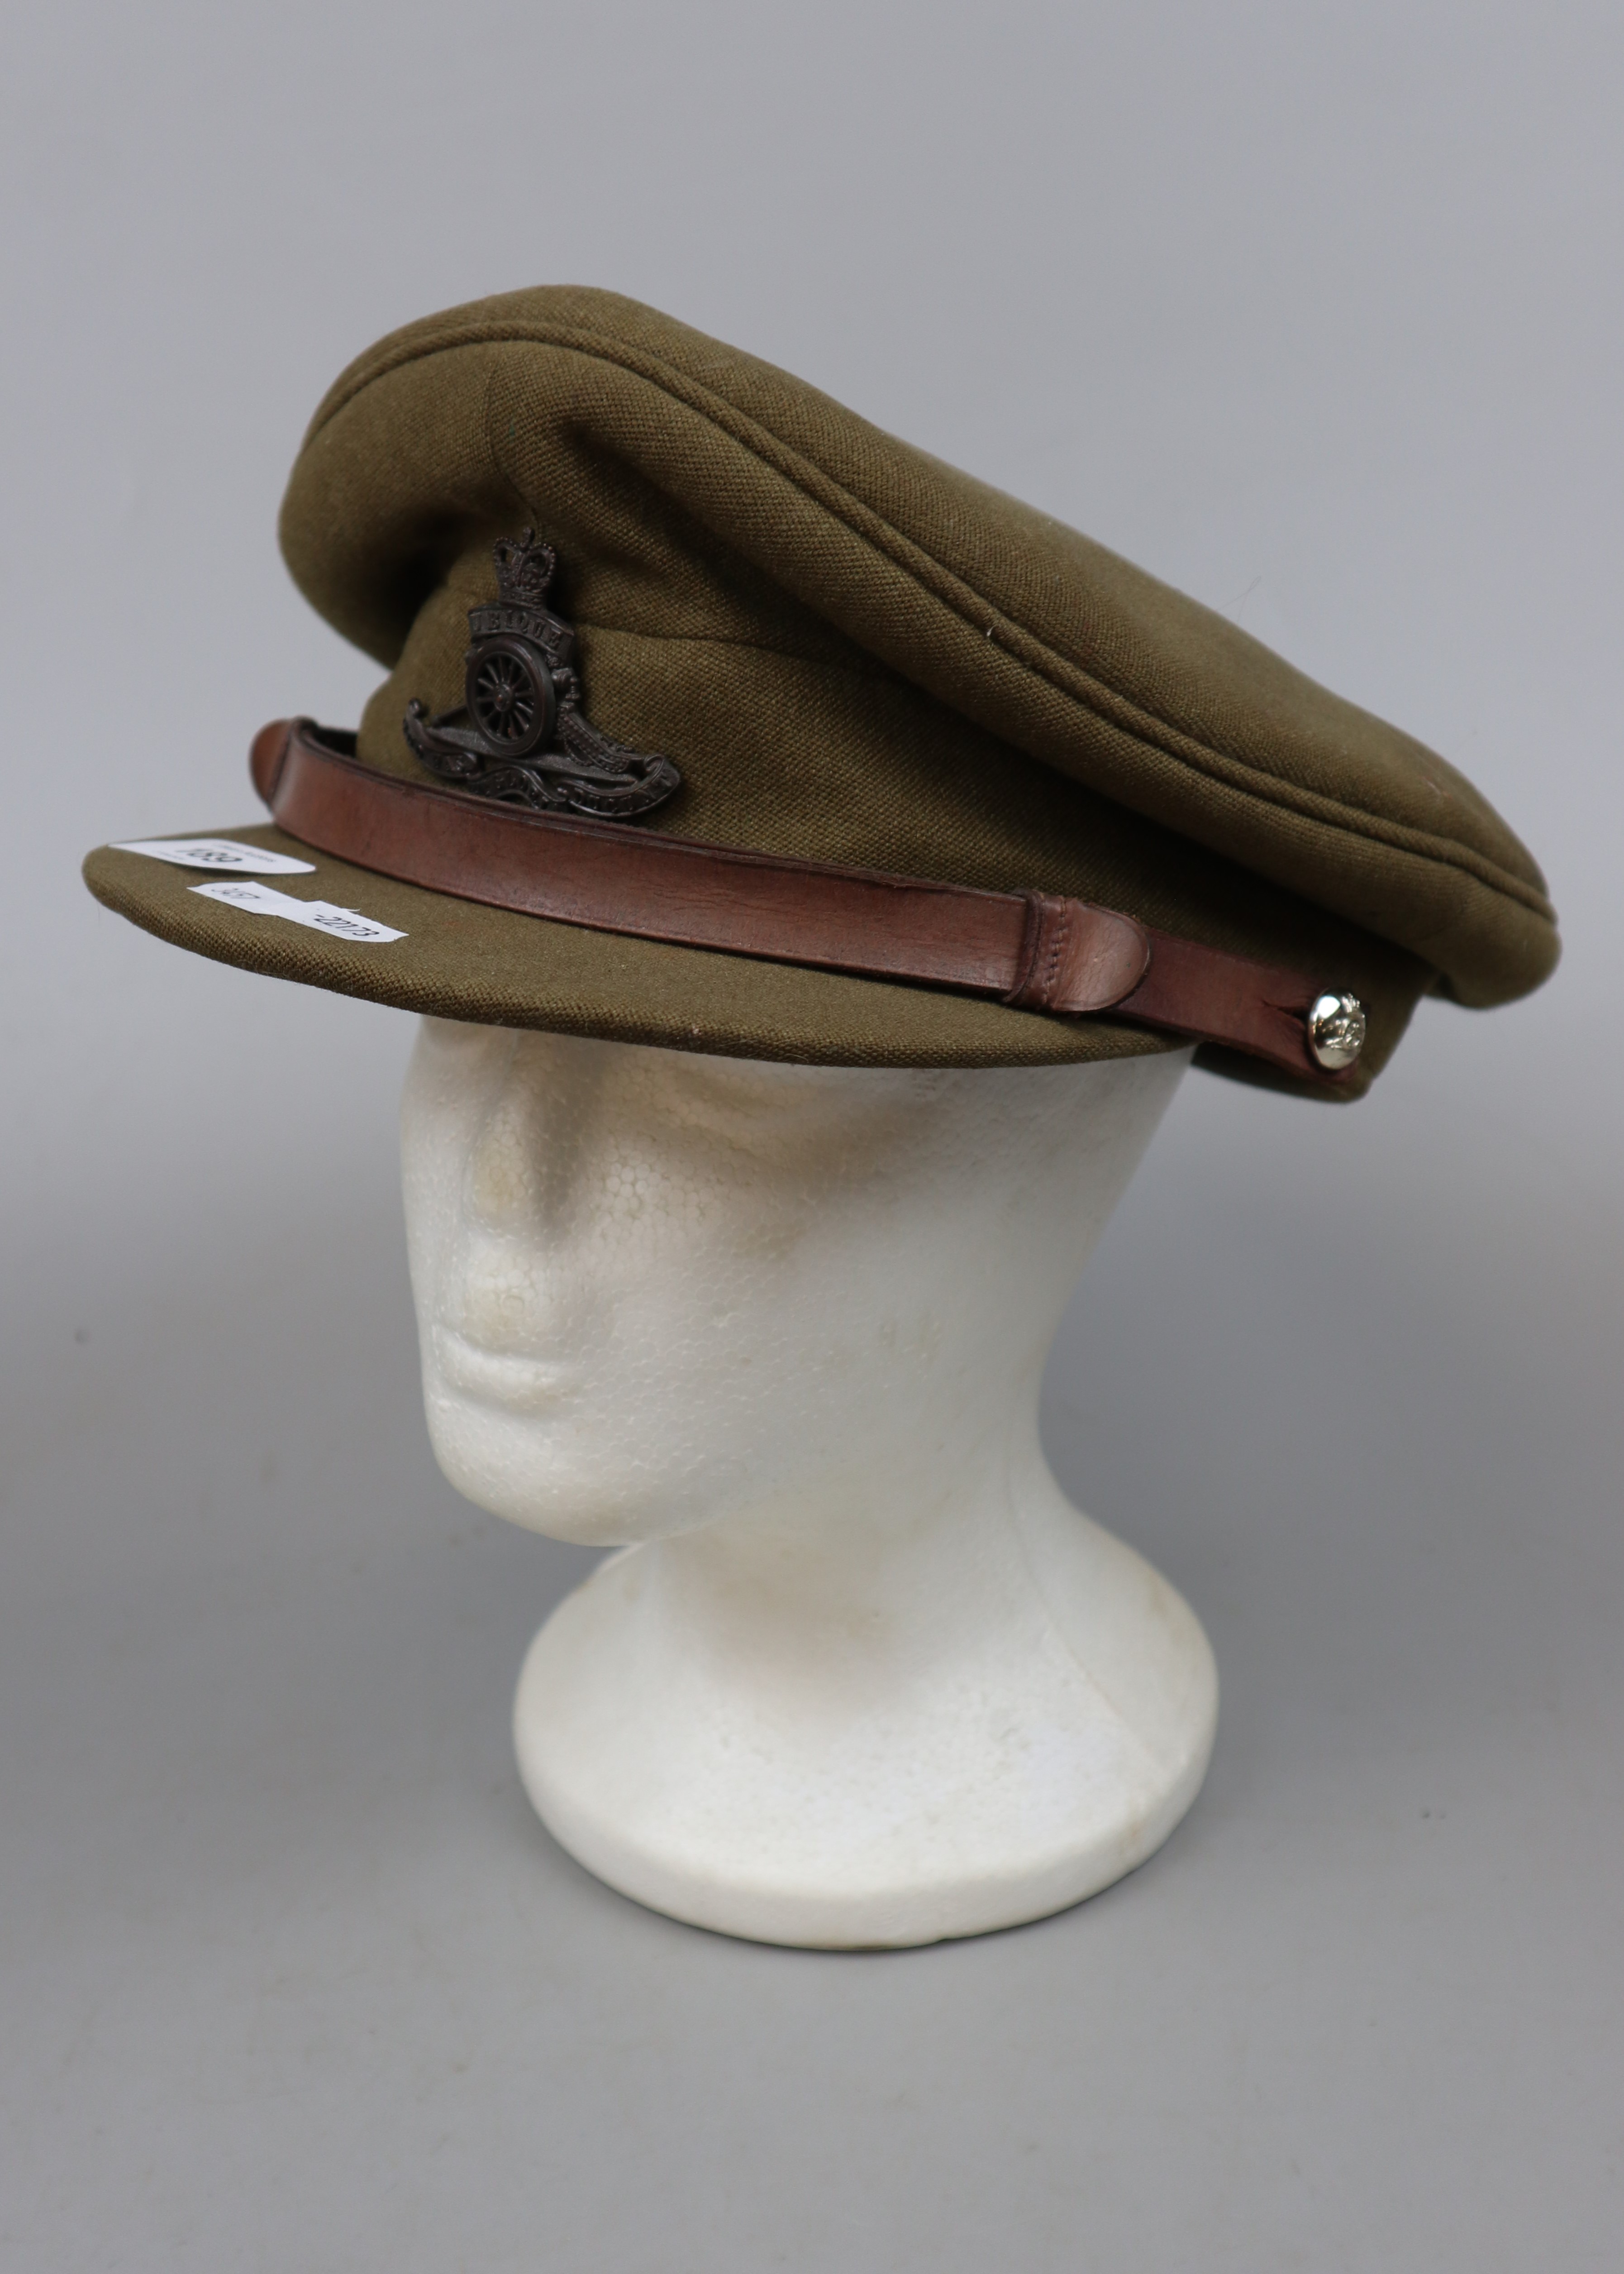 WWI officers army cap - Royal Artillery - Image 2 of 6